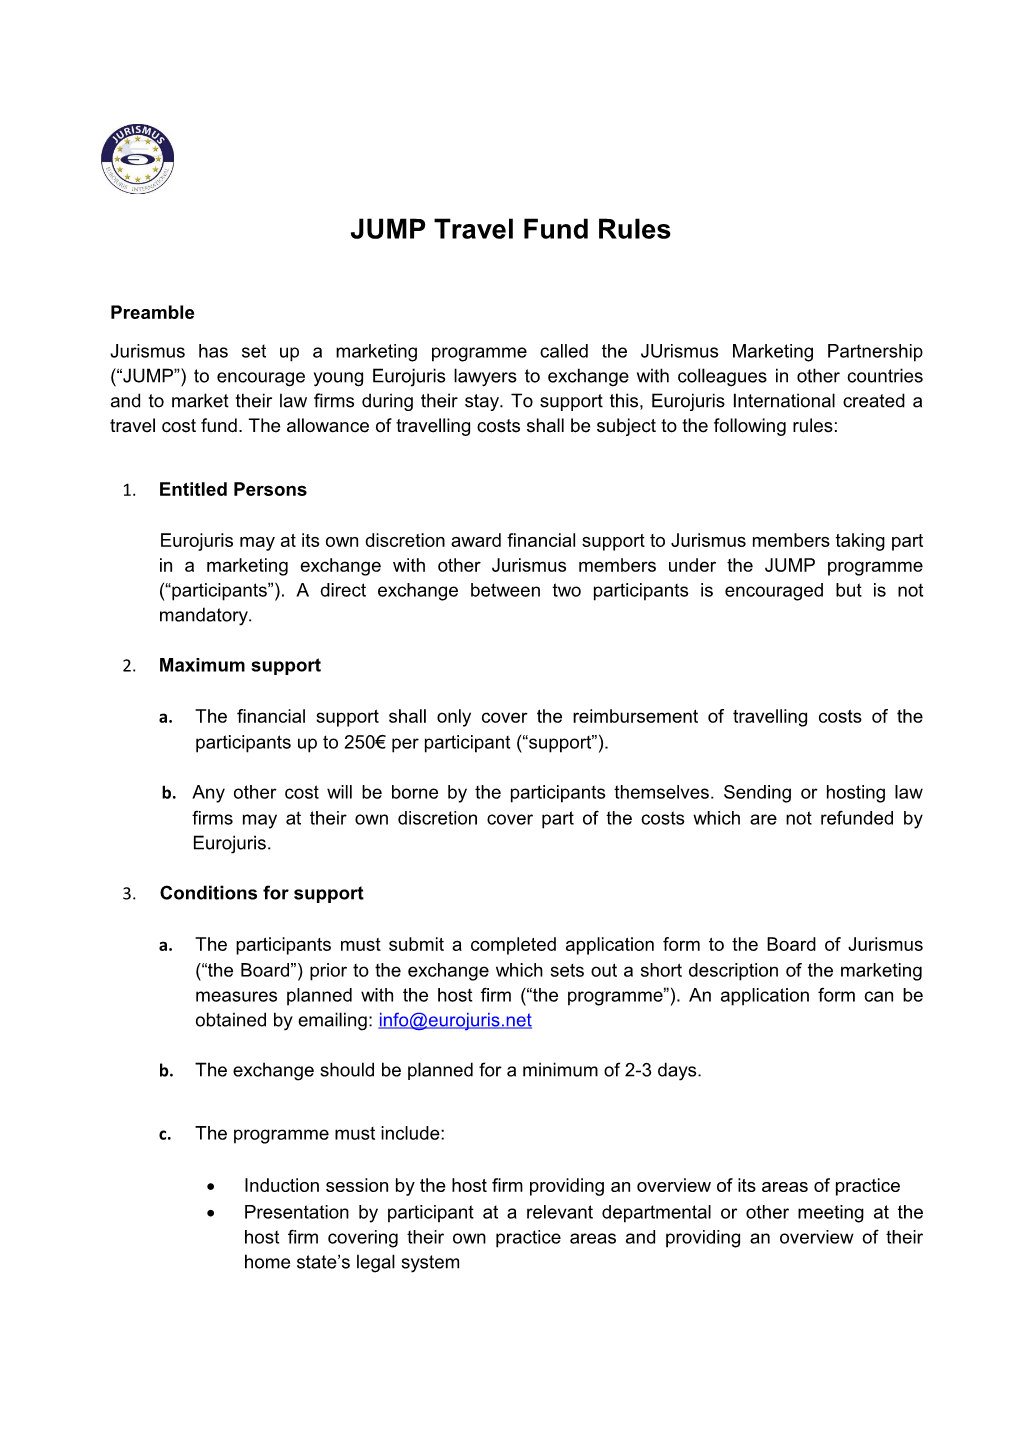 JUMP Travel Fund Rules